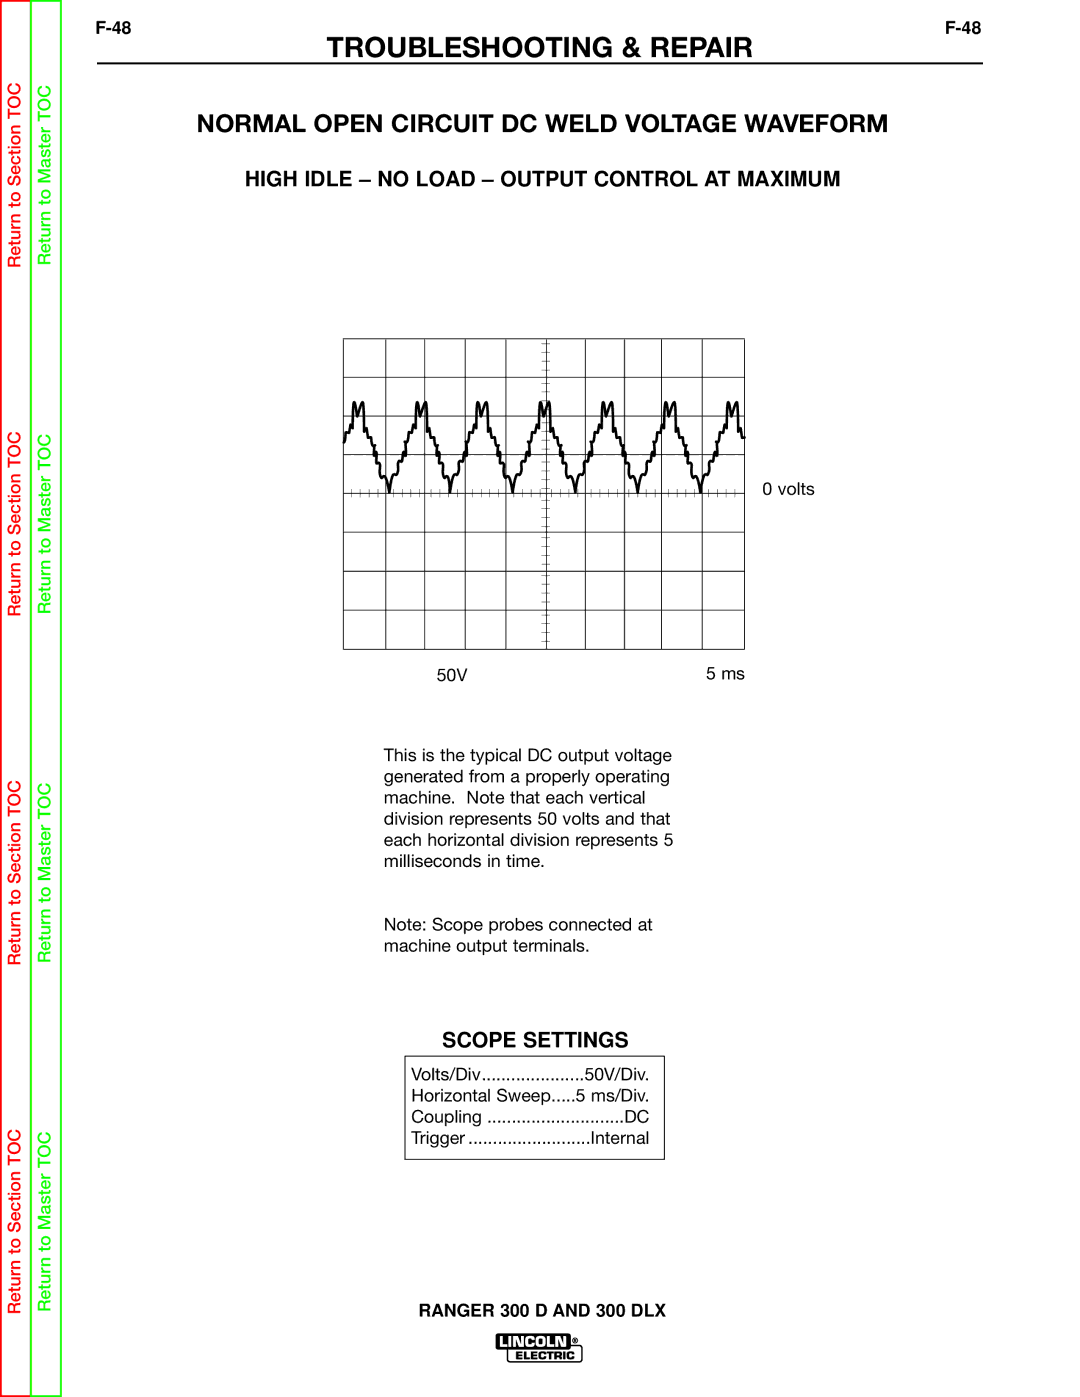 Lincoln Electric SVM148-B service manual Normal Open Circuit DC Weld Voltage Waveform 